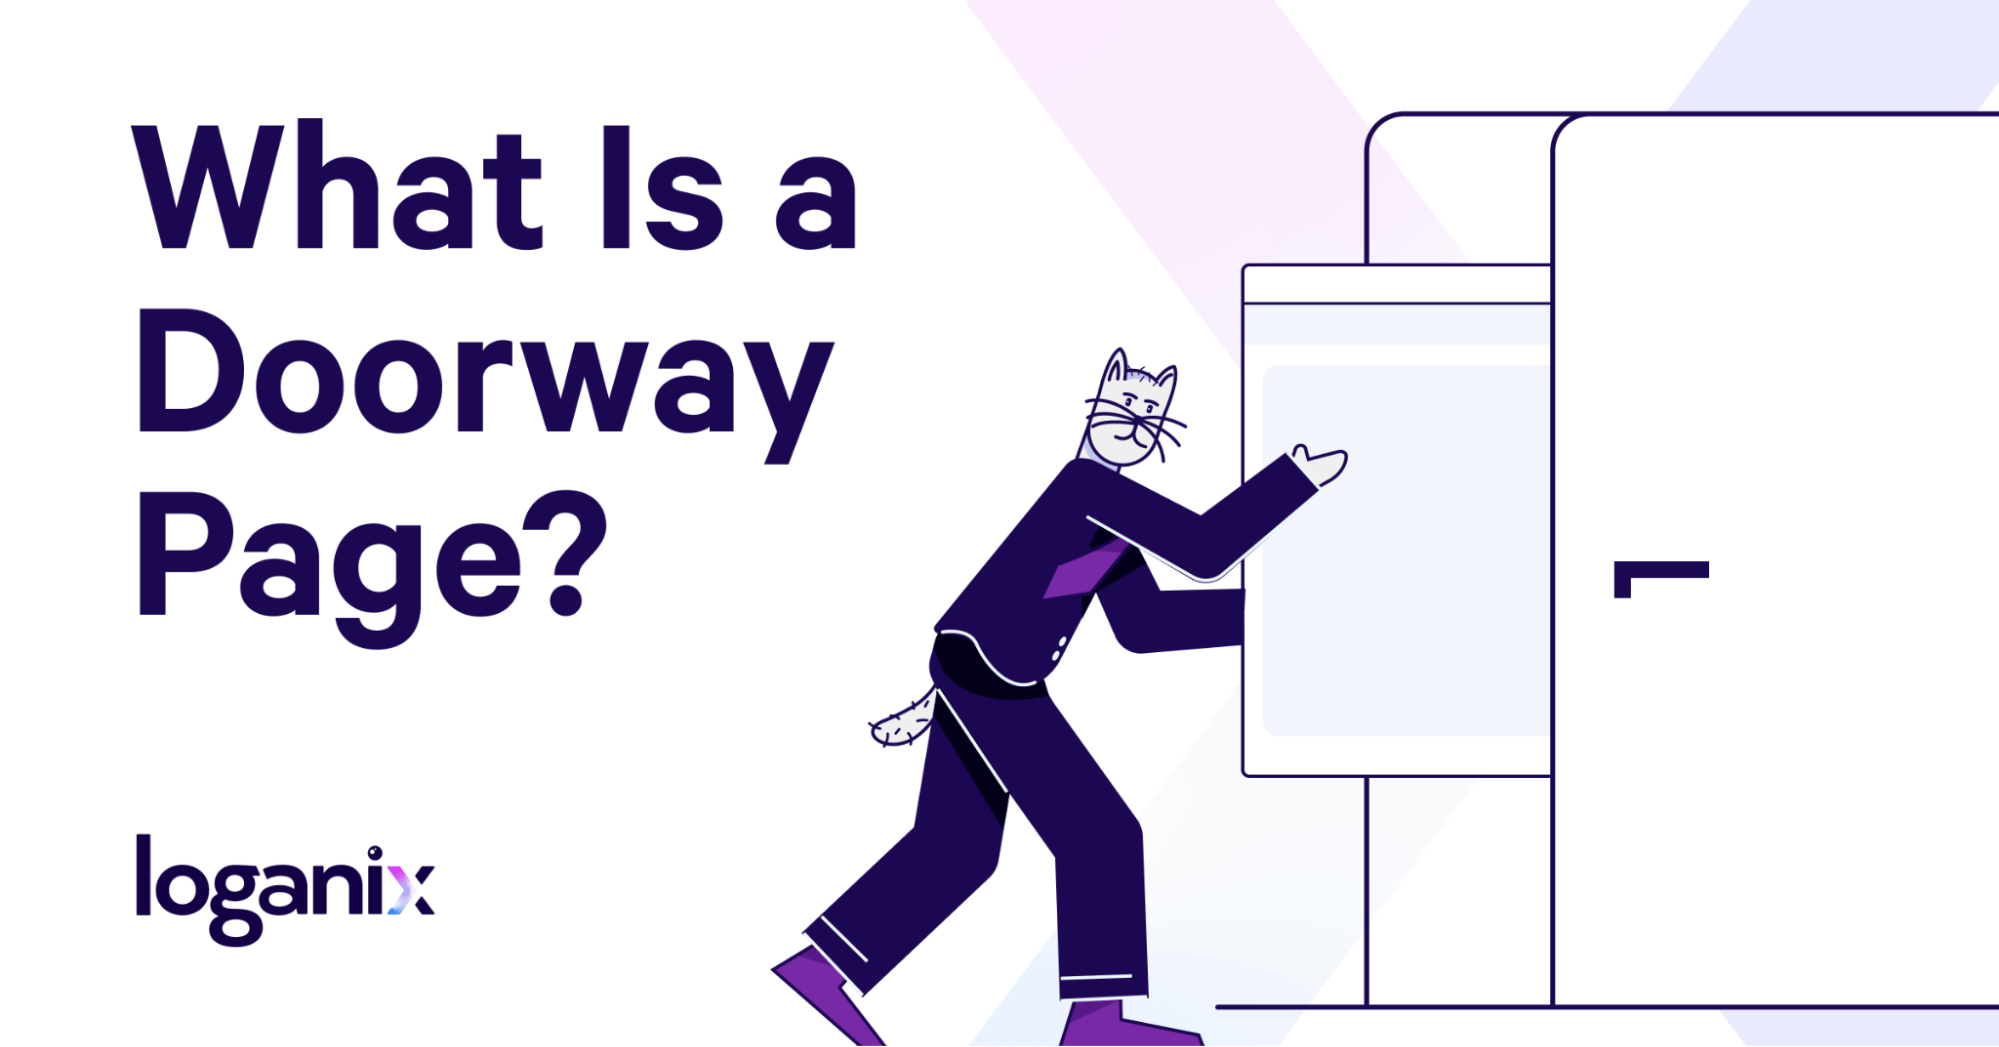 What Is a Doorway Page?